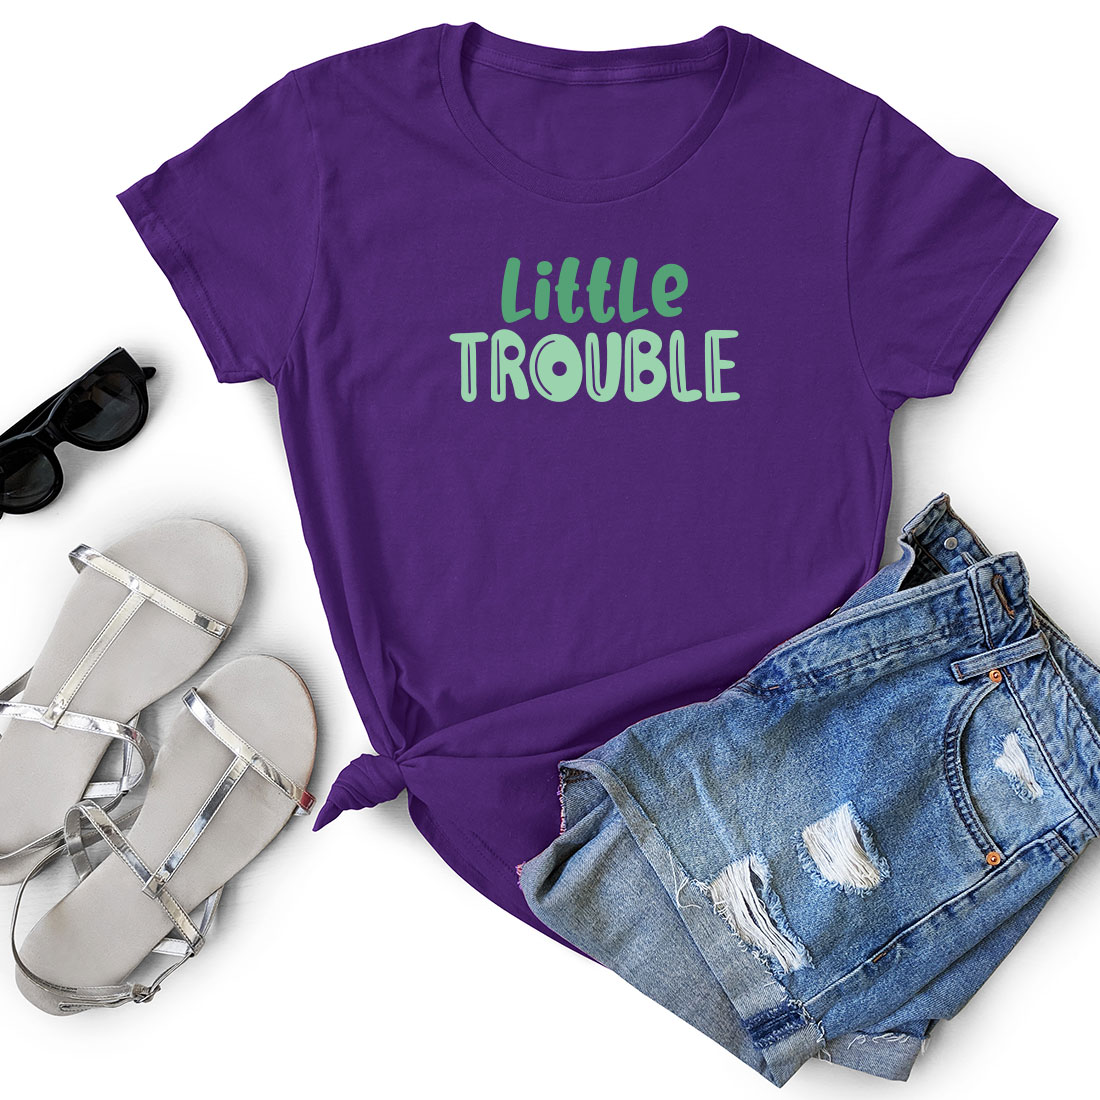 Purple shirt that says little trouble next to a pair of shorts.